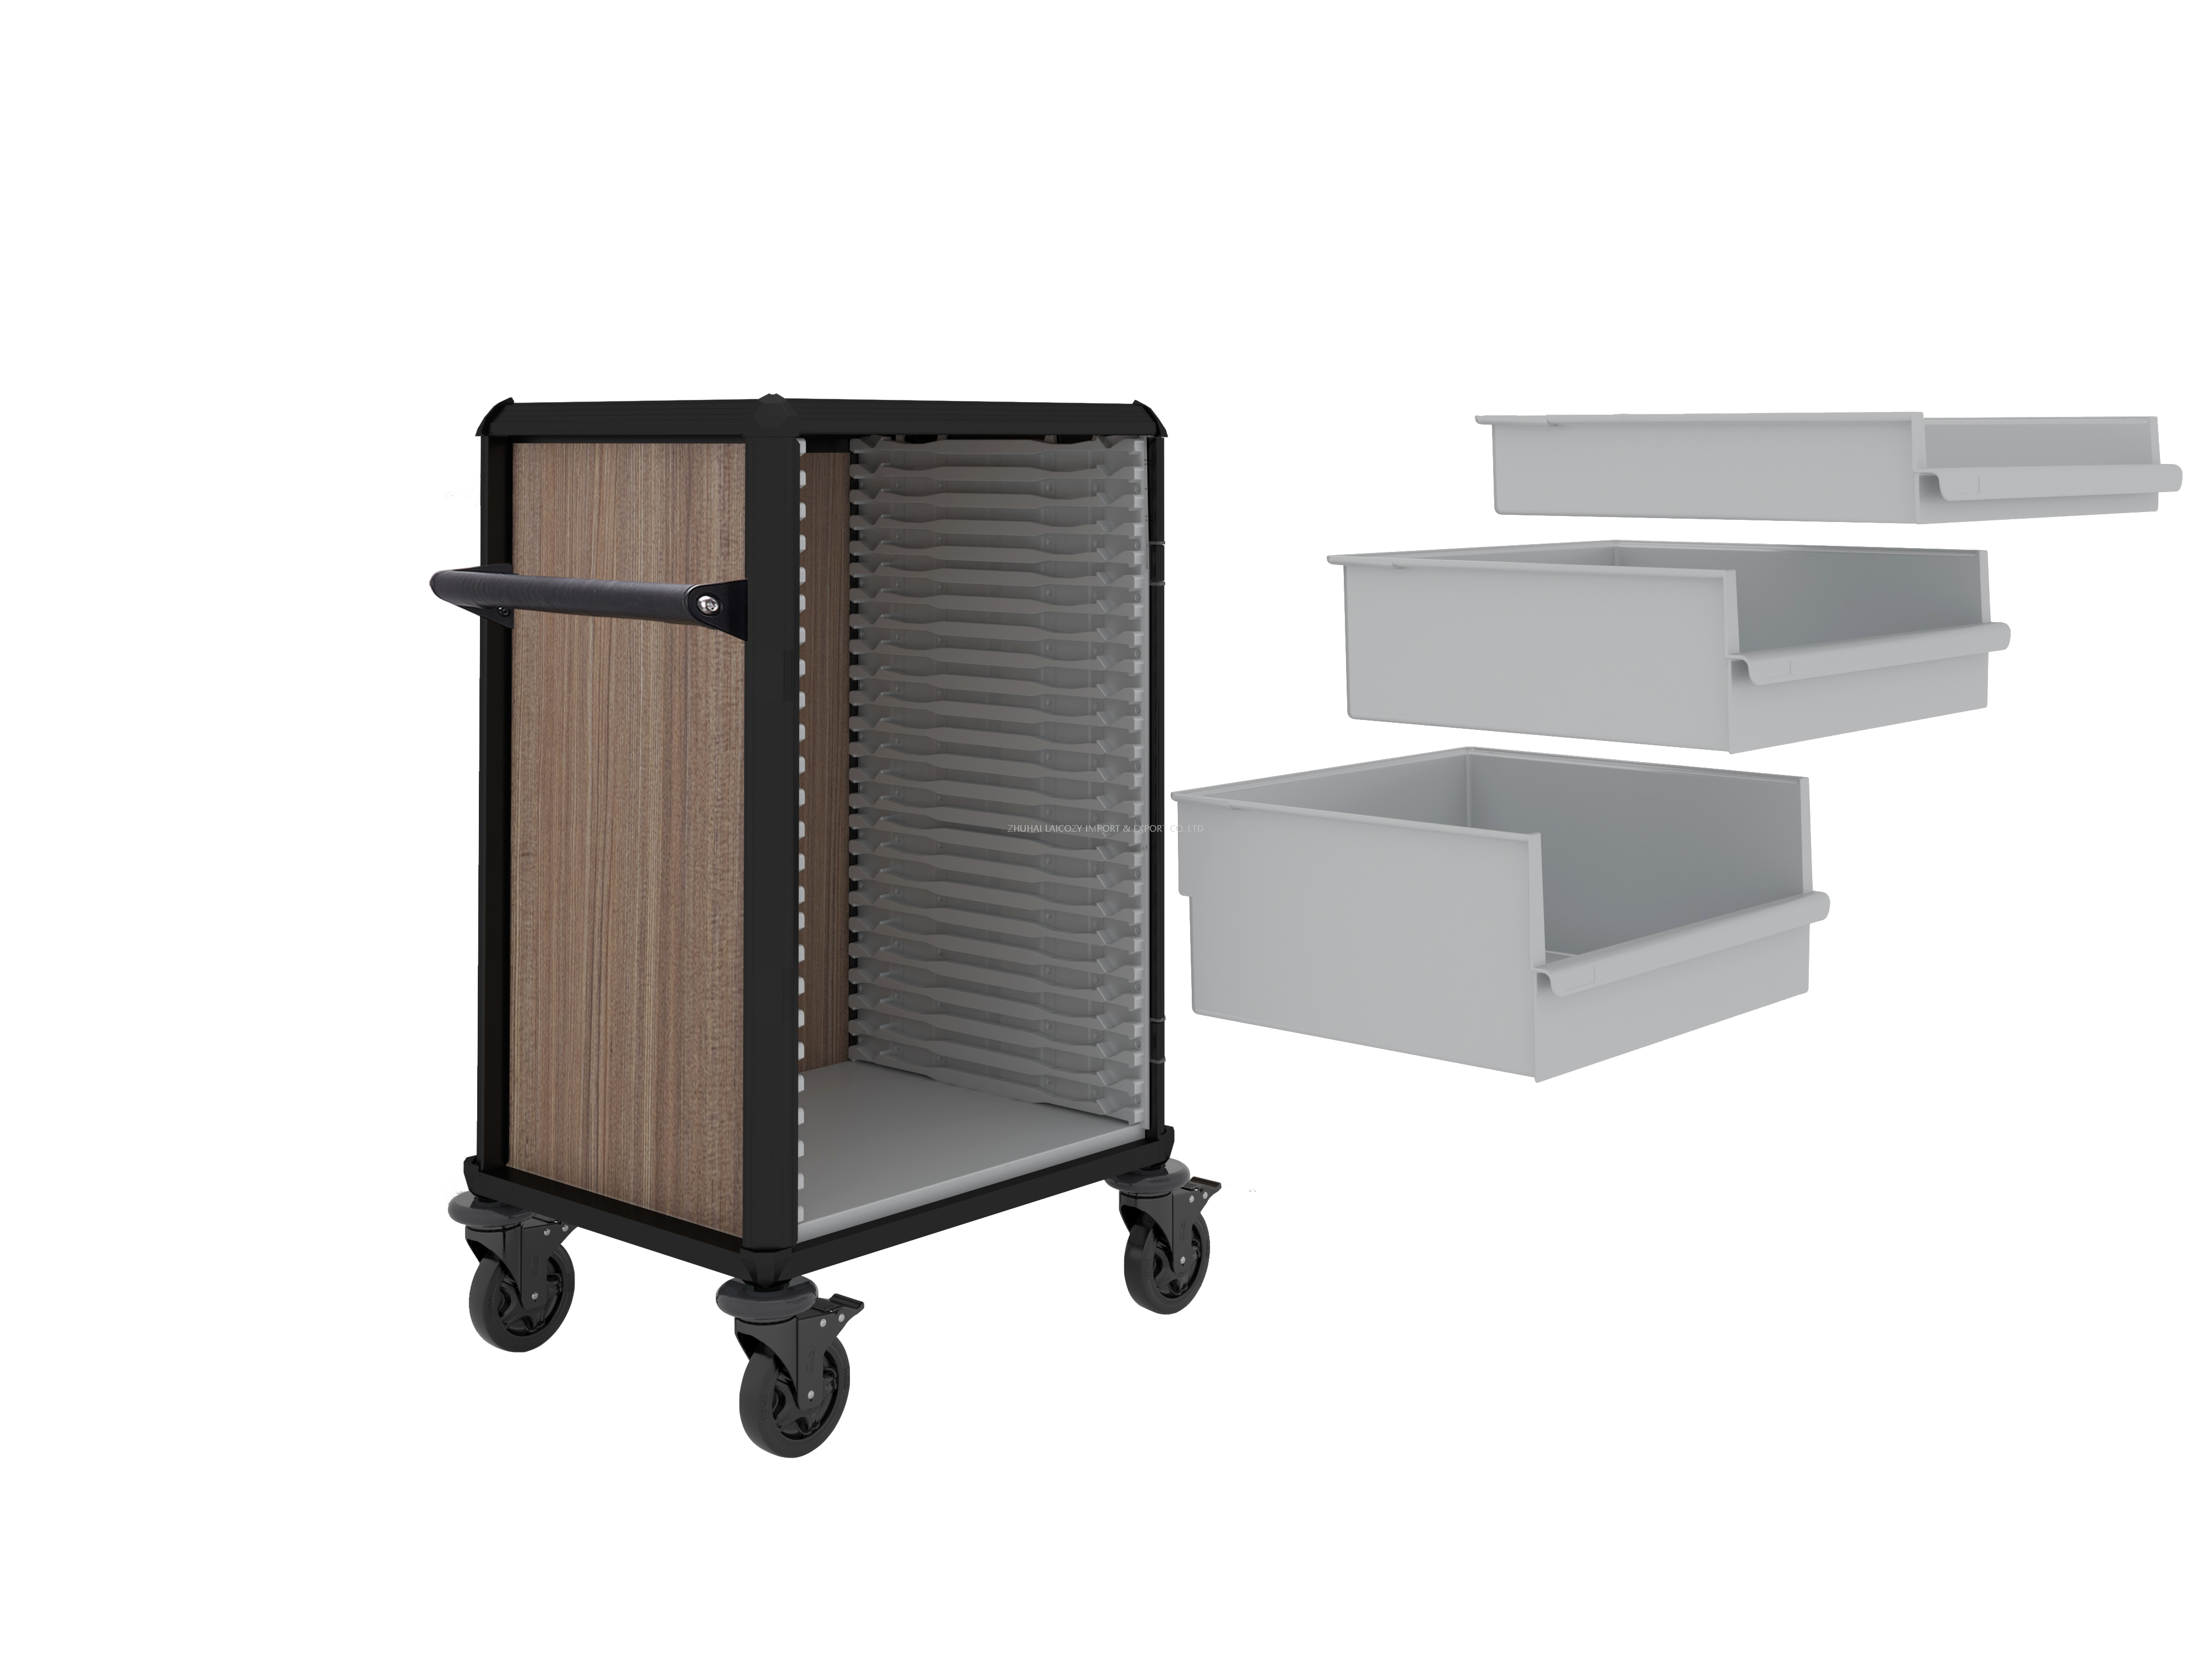 Hotel Customize Housekeeping Cart Cleaning Trolley Alminium Multi-function Cart